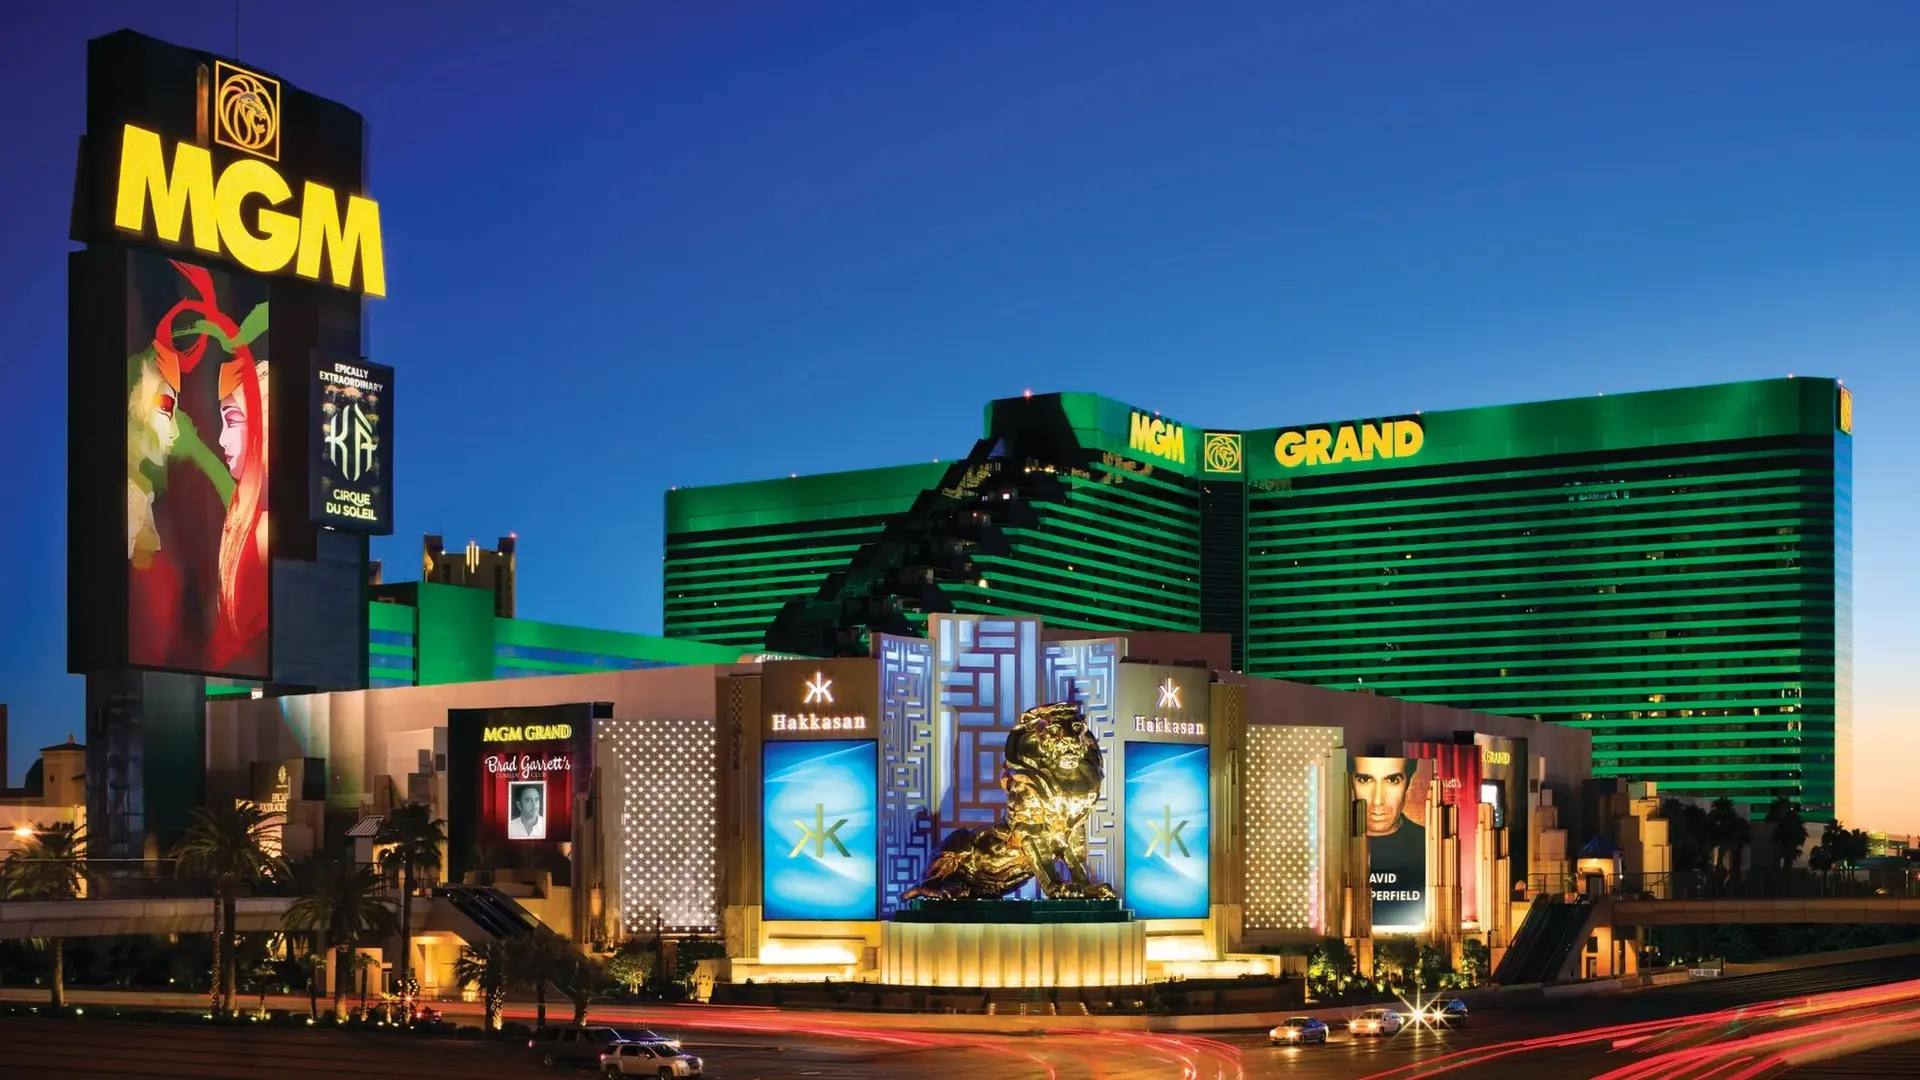 Golden lion statue, advertisements saying: Hakkasan and MGM GRAND, behind front green building saying: MGM GRAND in yellow font.